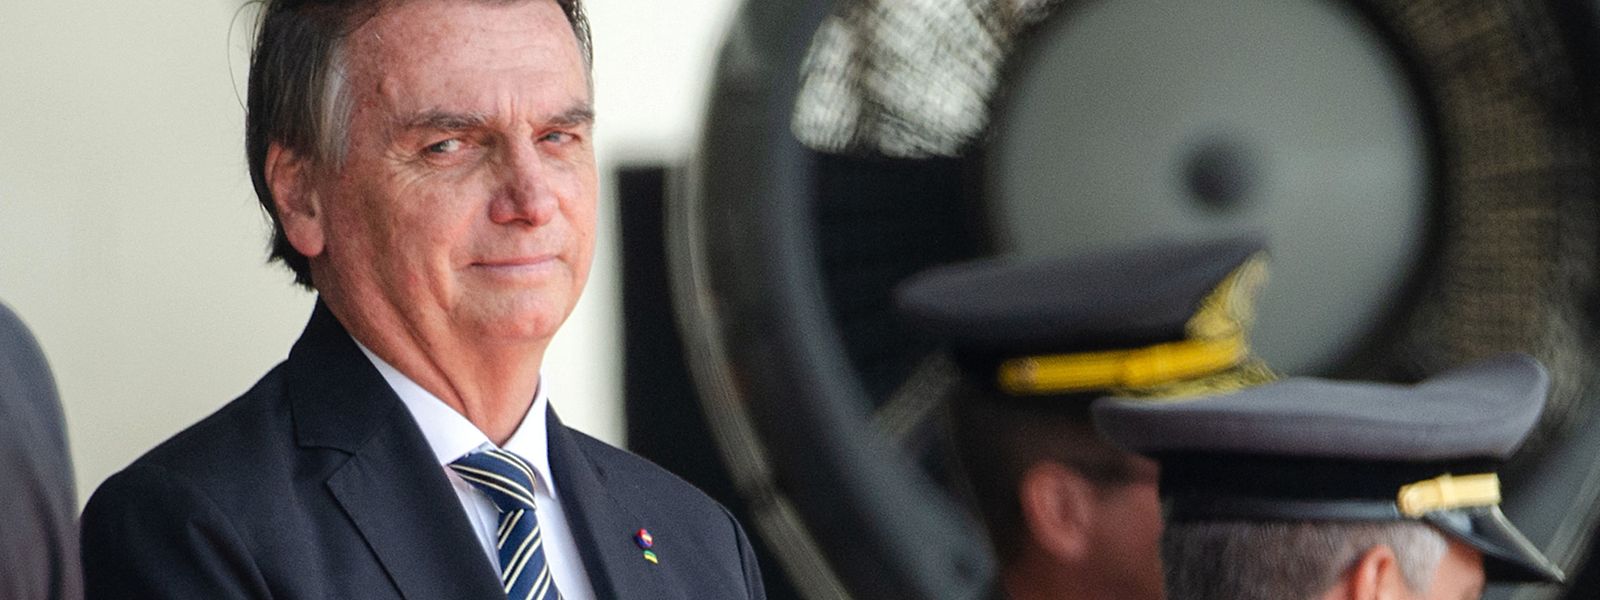 (FILES) In this file photo taken on November 26, 2022, Brazilian President Jair Bolsonaro gestures during a graduation ceremony for cadets at the Agulhas Negras Military Academy in Resende, Rio de Janeiro State, Brazil. - Brazil's outgoing president, Jair Bolsonaro, on December 23, 2022, pardoned security force agents convicted of crimes committed more than 30 years ago, which according to legal experts, applies to those responsible for the 1992 Carandiru prison massacre. (Photo by T�RCIO TEIXEIRA / AFP)